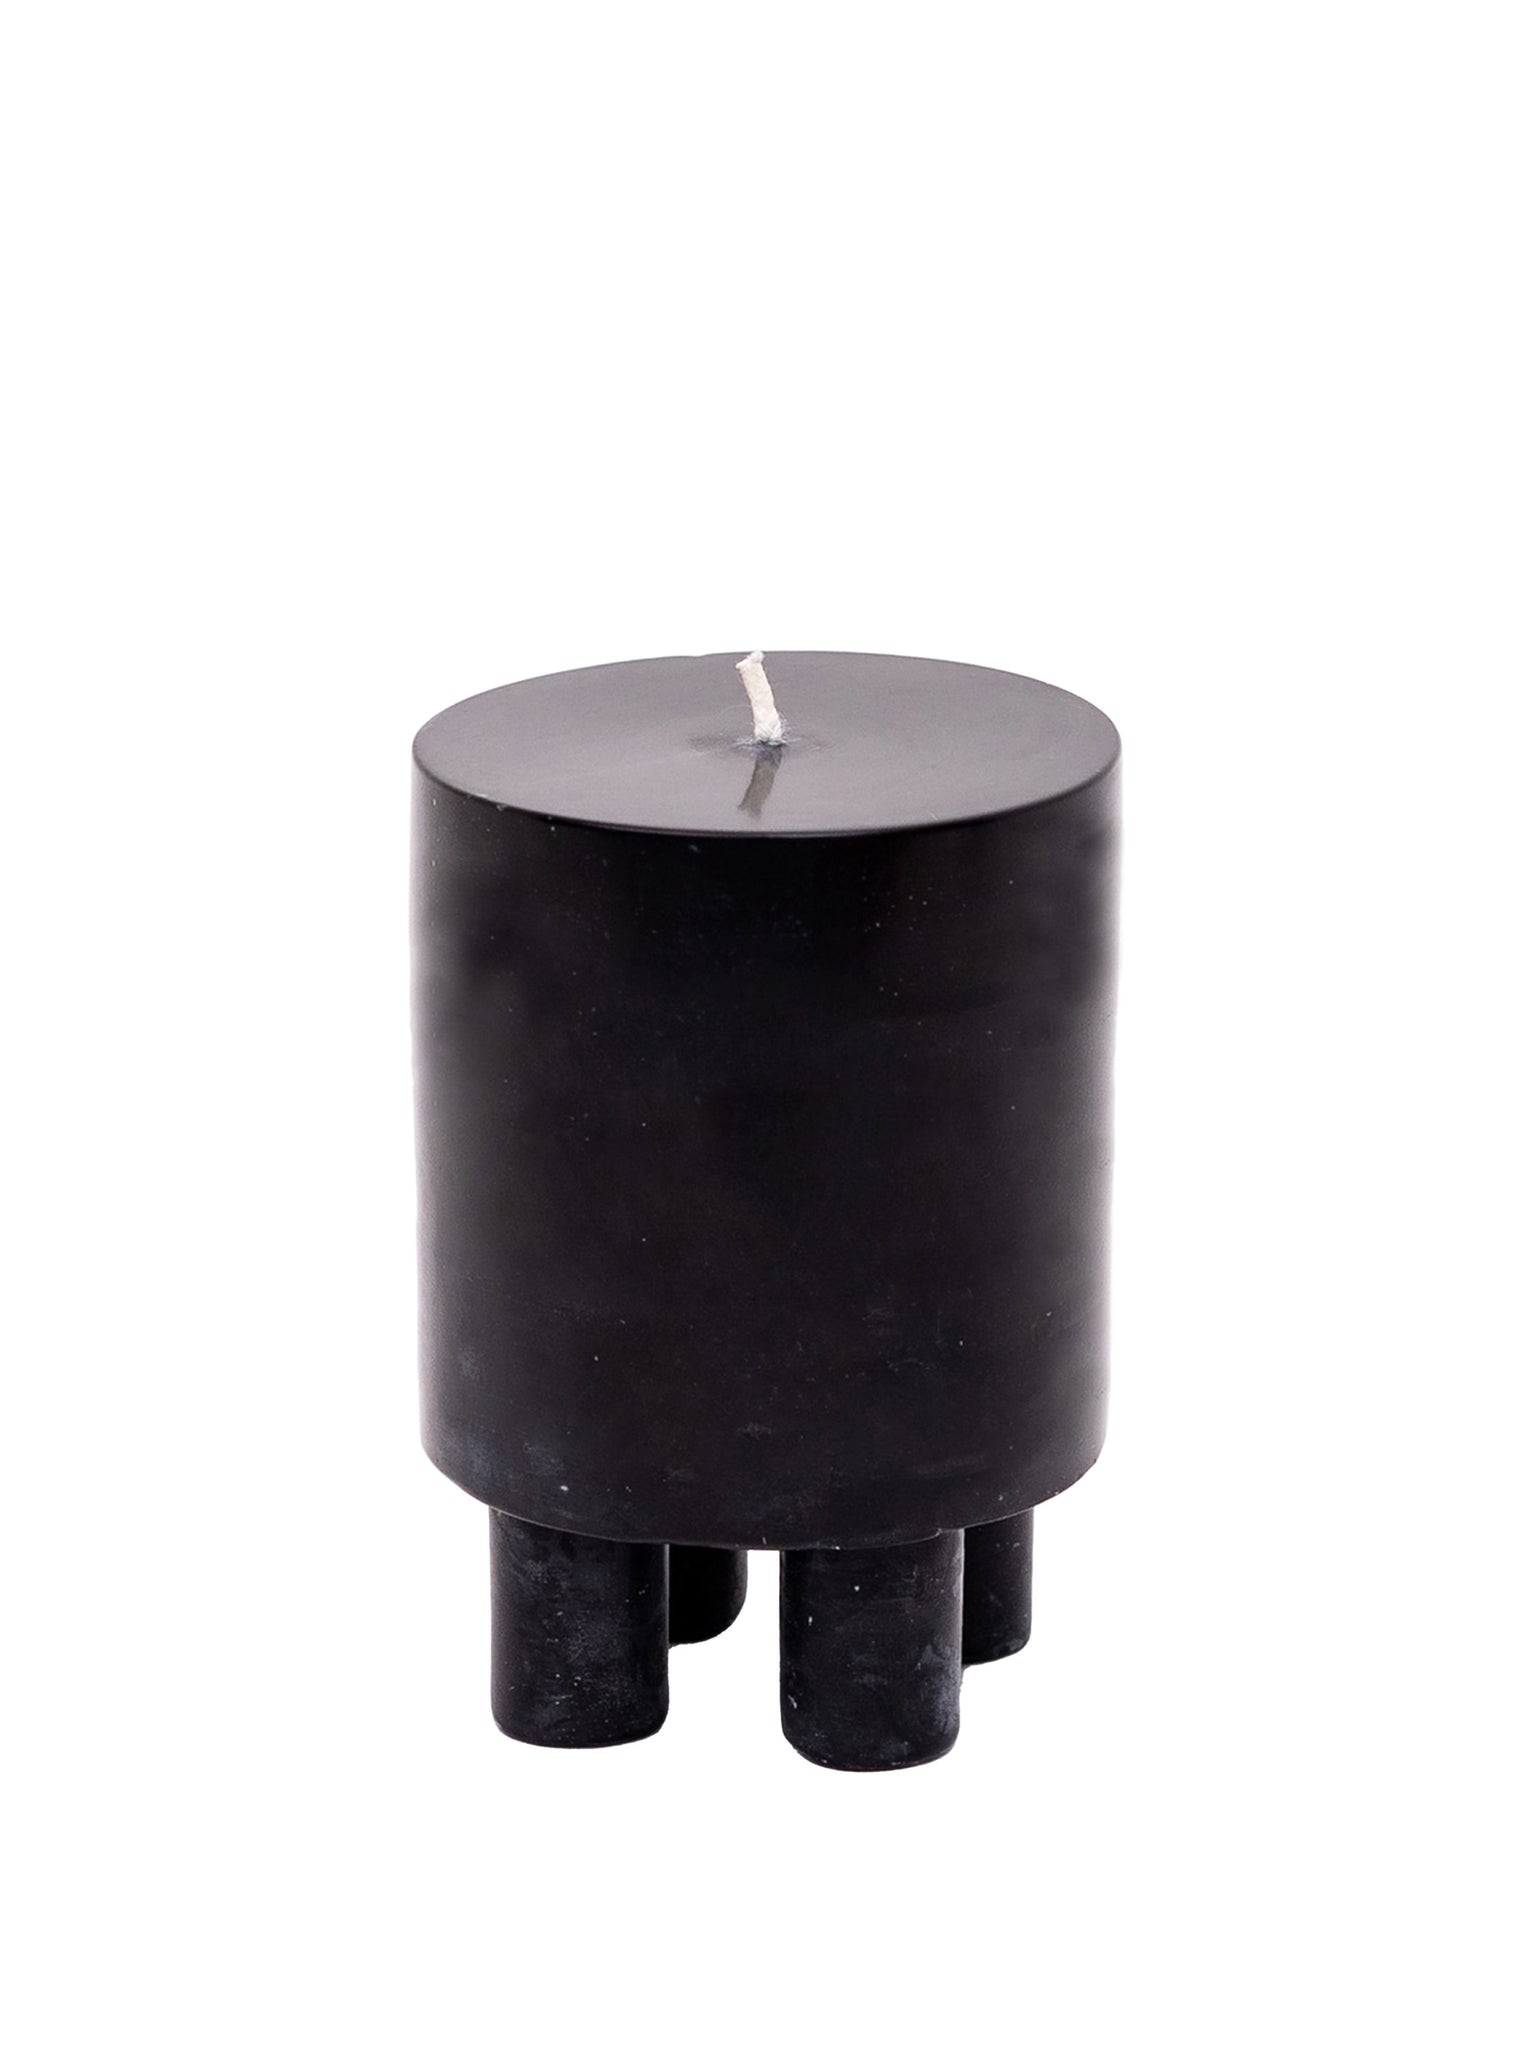 Stack Candle Prop, shaped candles by Yod and co in black